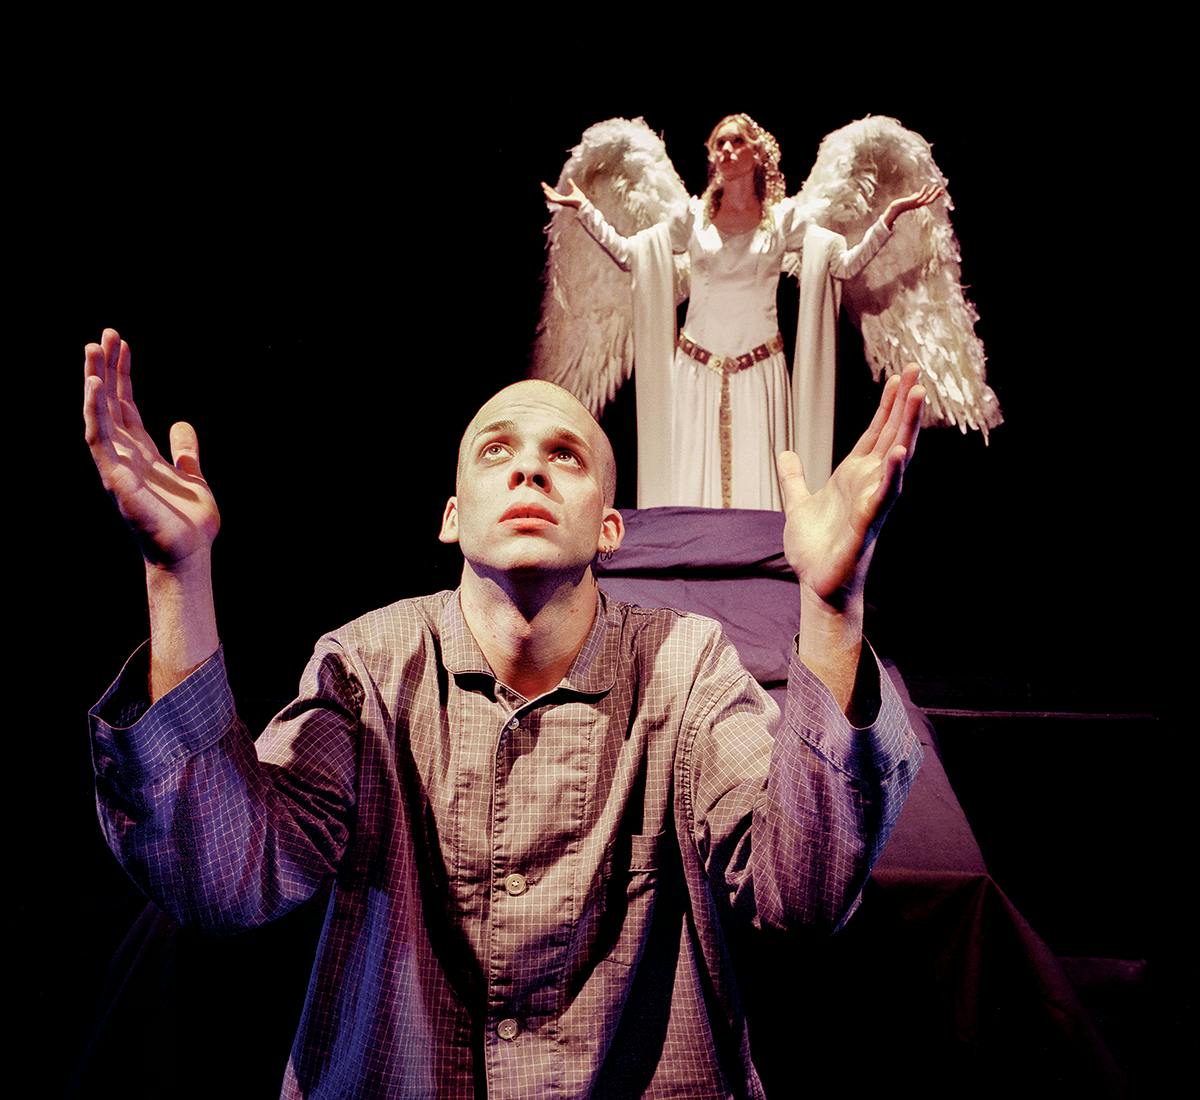 Ferris Craddock (foreground) as Prior Walter and Rainie Davis as the Angel on October 15, 1999.